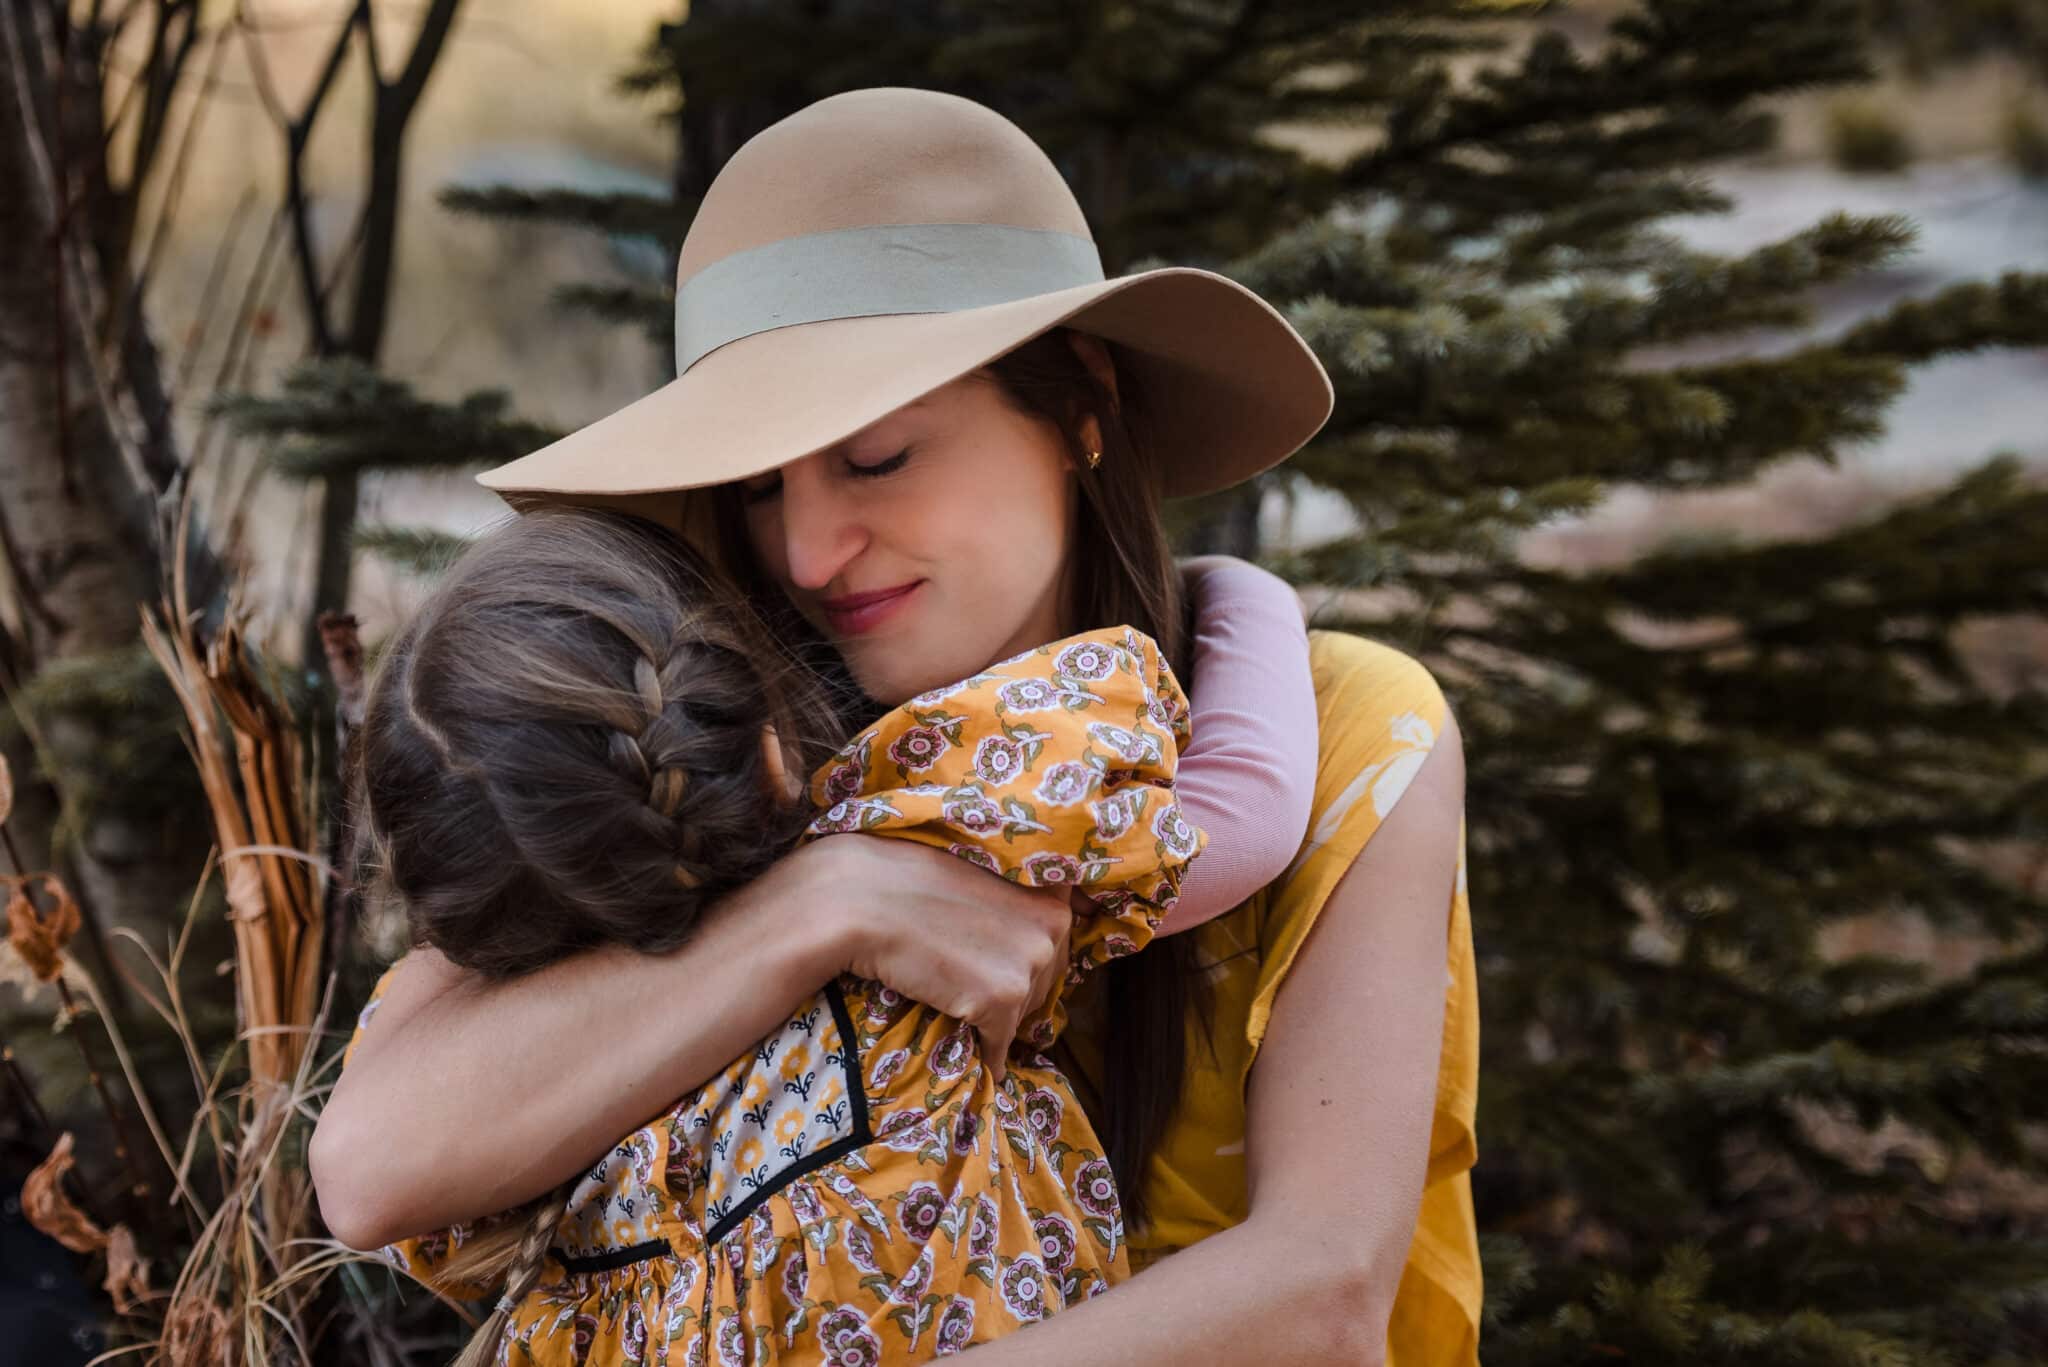 A mother wearing a wide brimmed hat closes her eyes and smiles as she holds her young daughter tightly for a hug during a family portrait session.